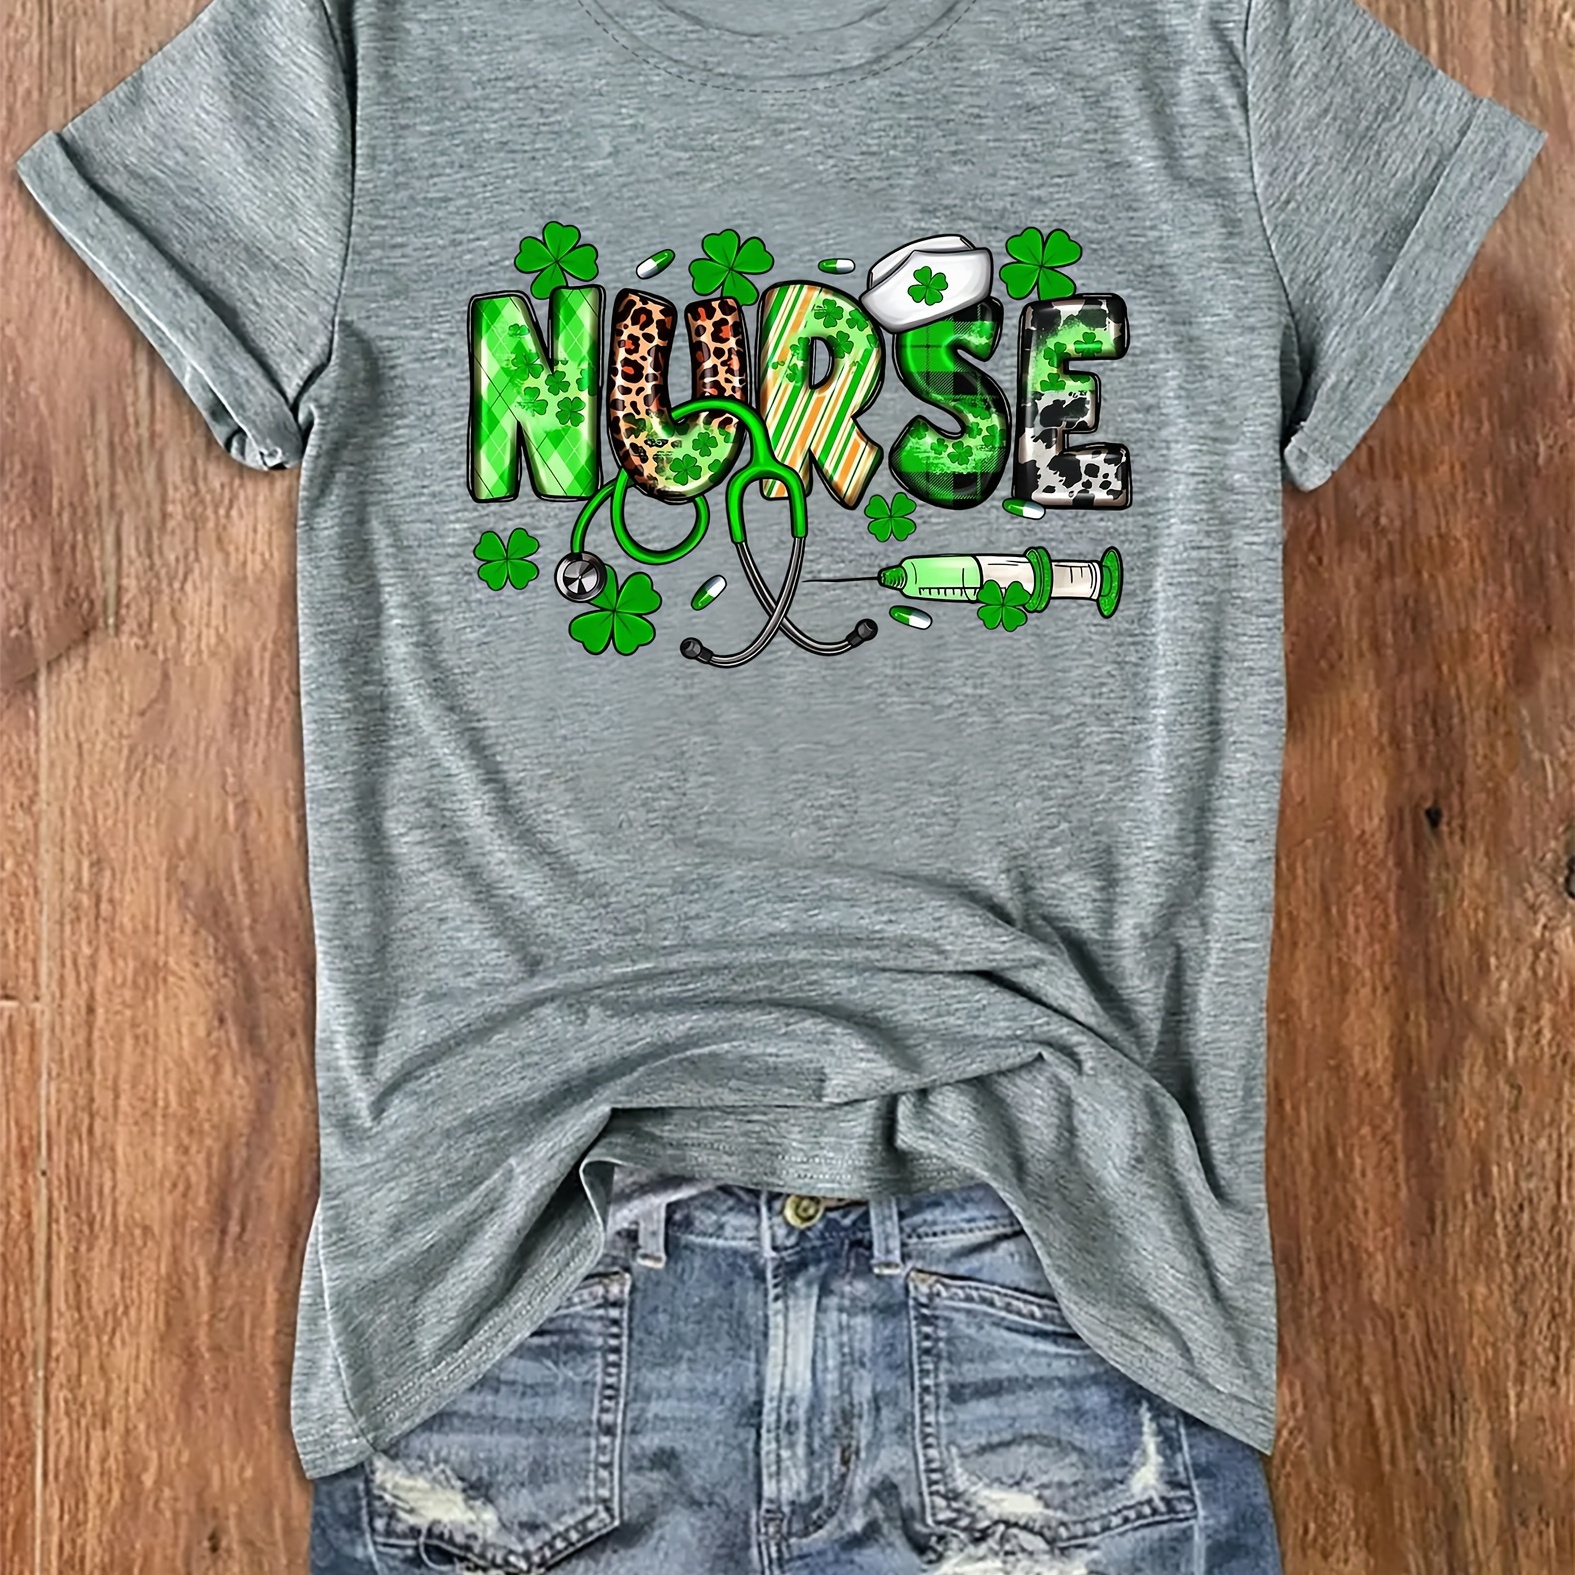 

St. Patrick's Day Nurse Print T-shirt, Casual Crew Neck Short Sleeve Top For Spring & Summer, Women's Clothing